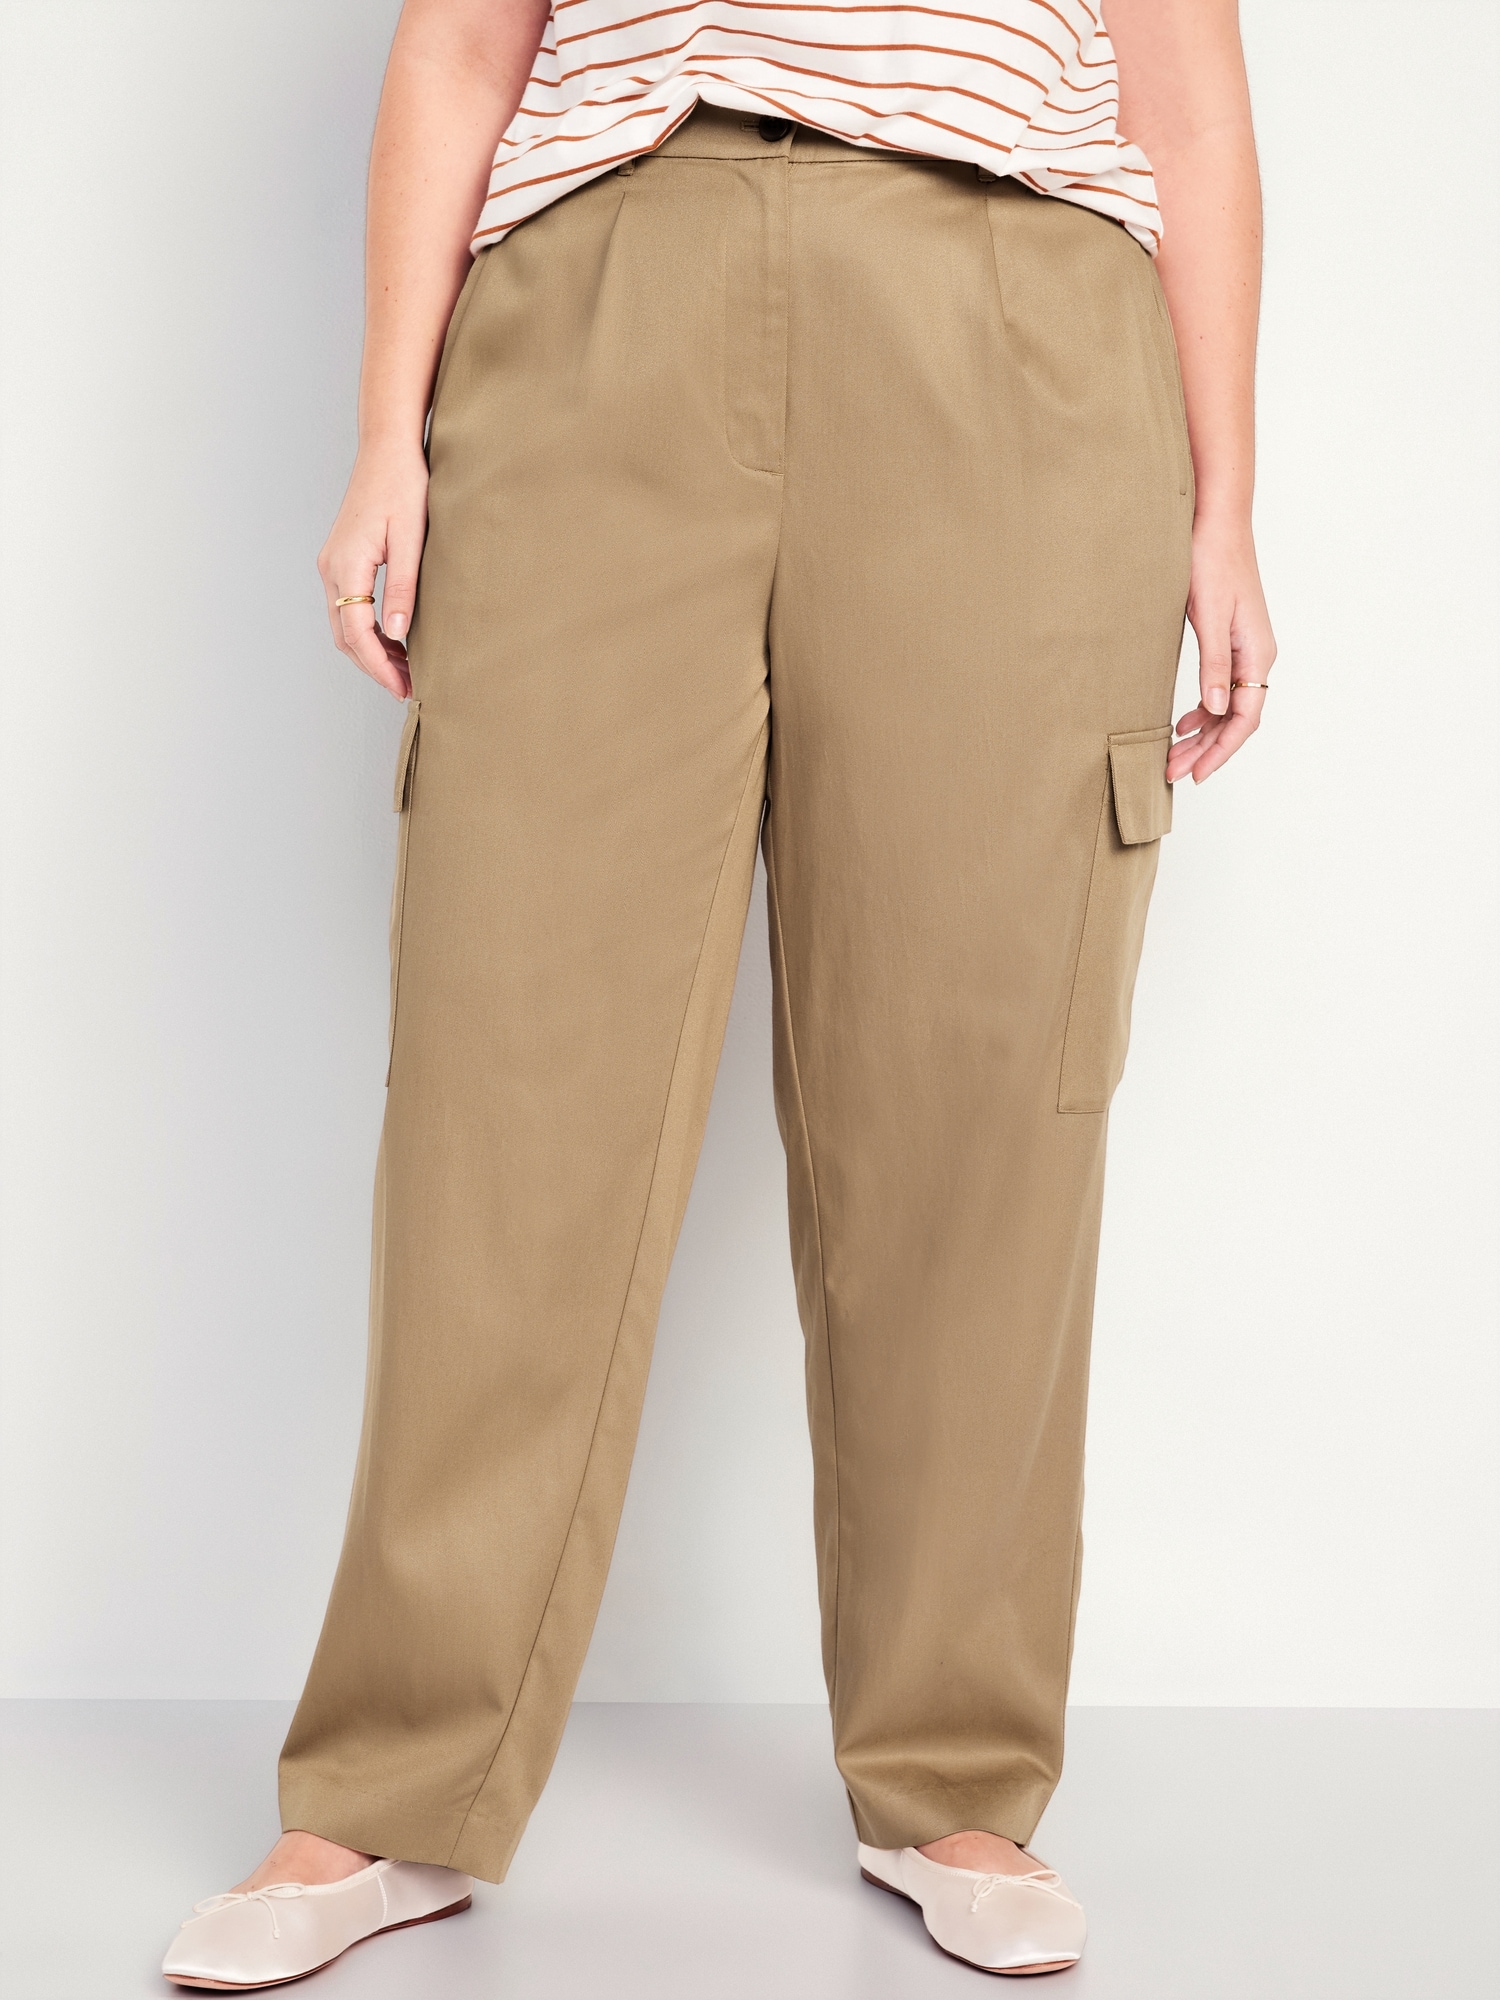 Old Navy - Maternity Solid Brown Tan Cargo Pants Size M (Maternity